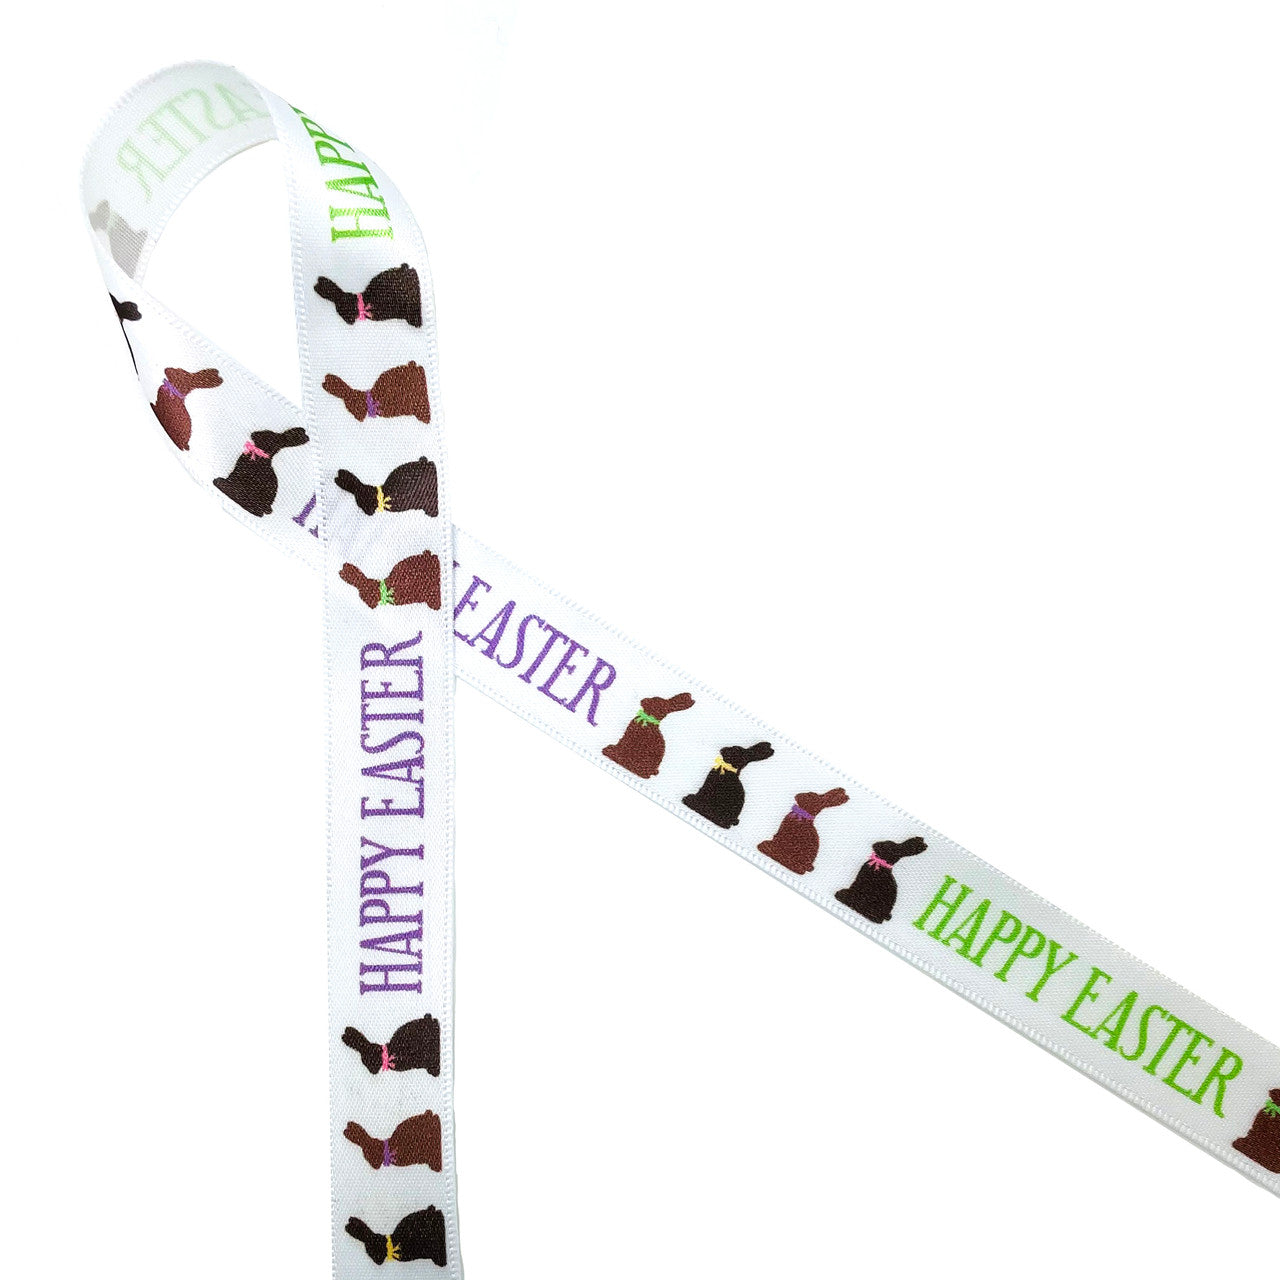 Chocolate bunnies with cute pastel bows  followed by Happy Easter on 5/8"  white satin ribbon is just the dressing needed for all your chocolate Easter treats!